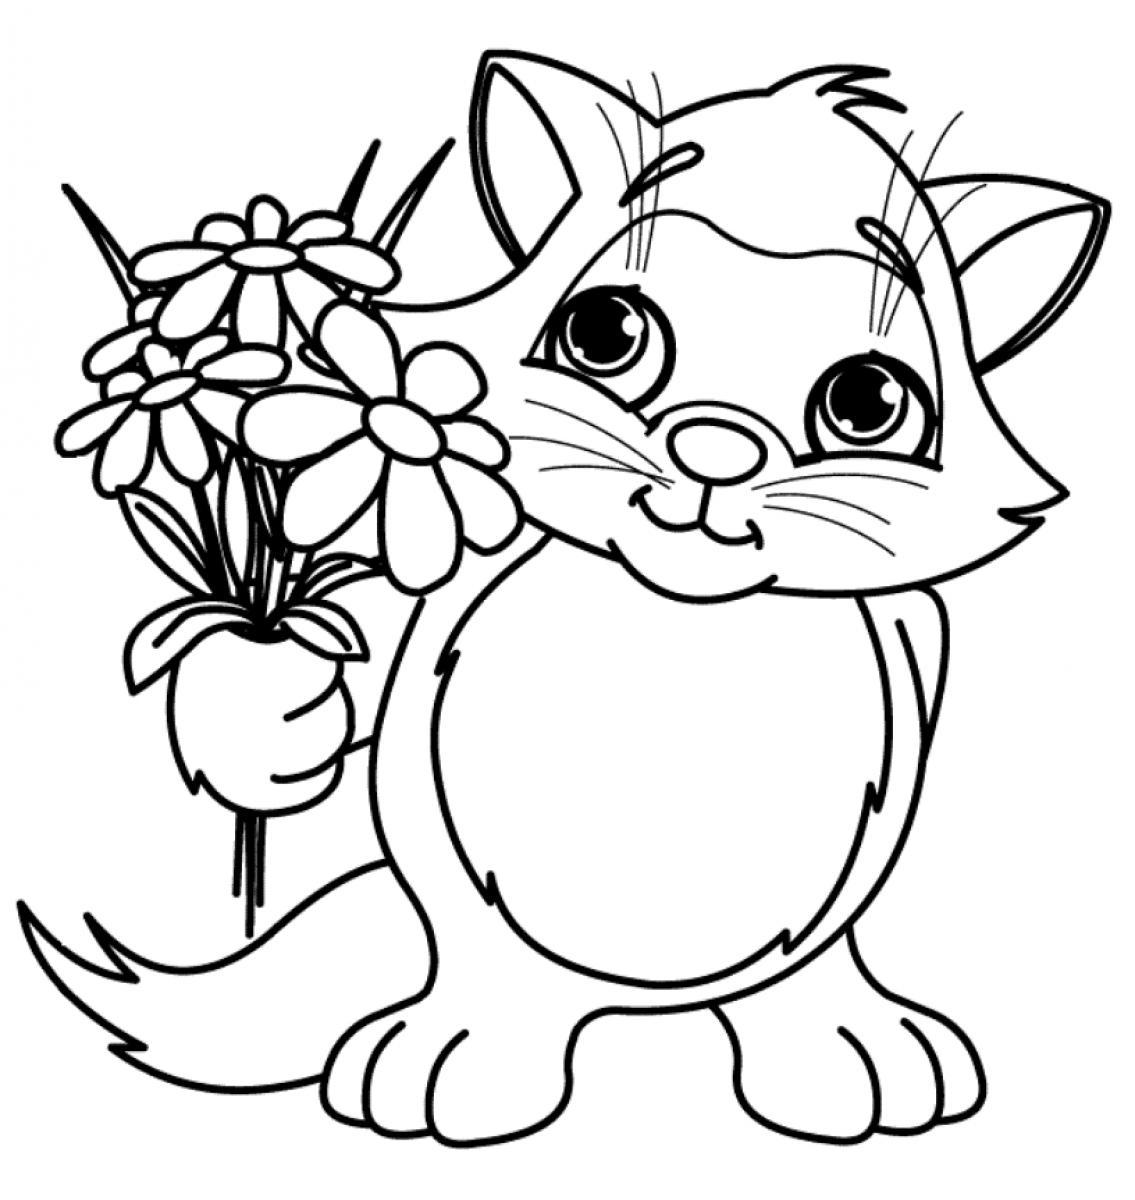 Cat With Flowers Coloring Page